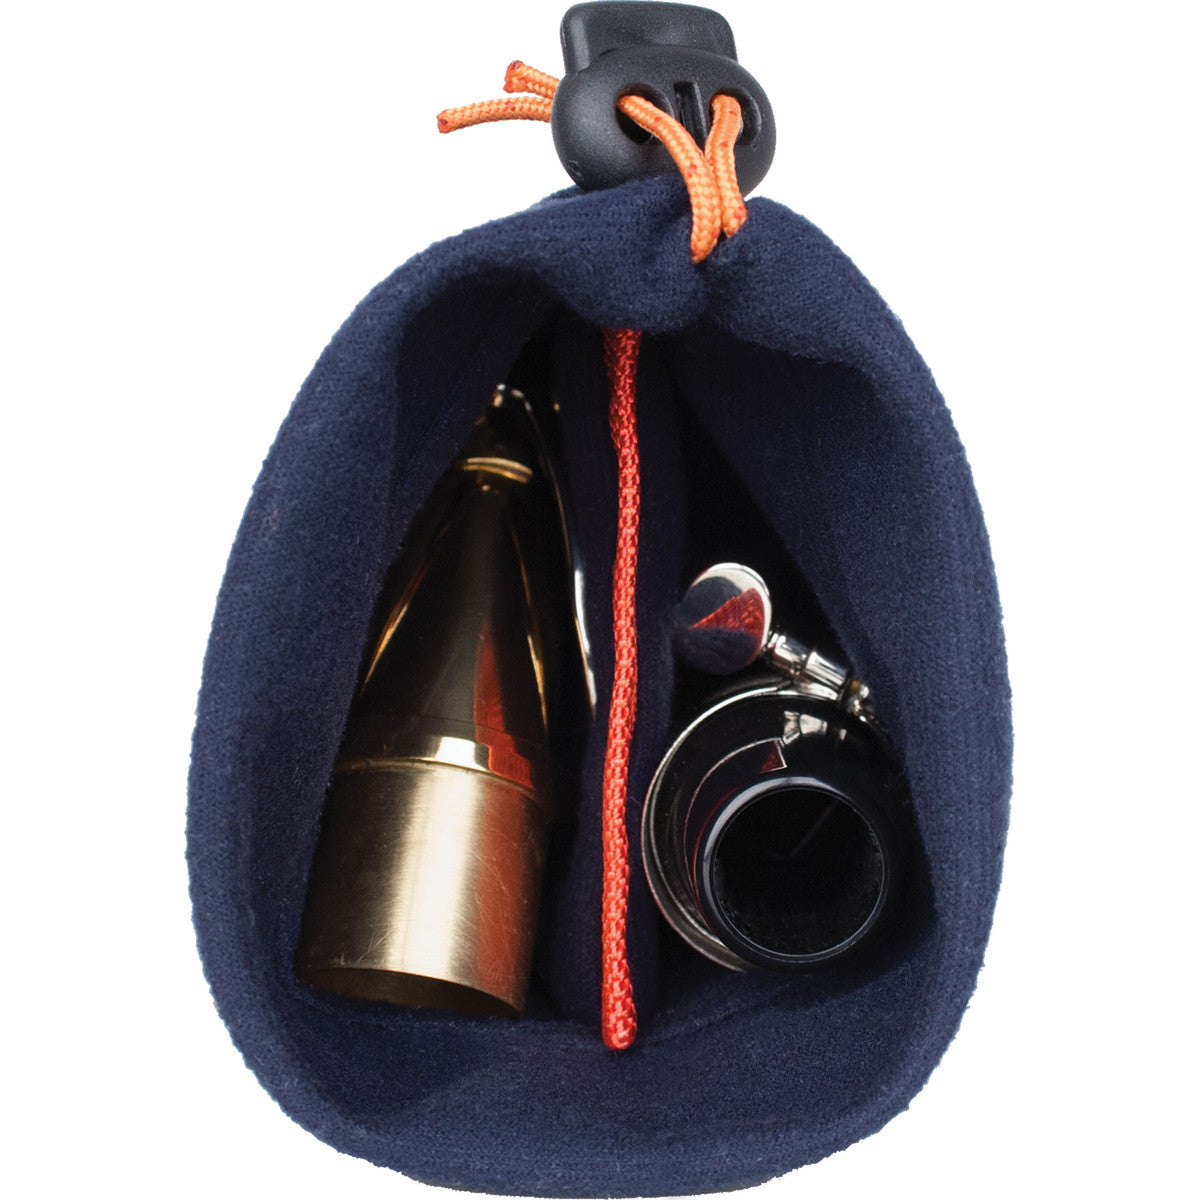 Baritone Saxophone In-Bell Neck & Mouthpiece Storage Pouch